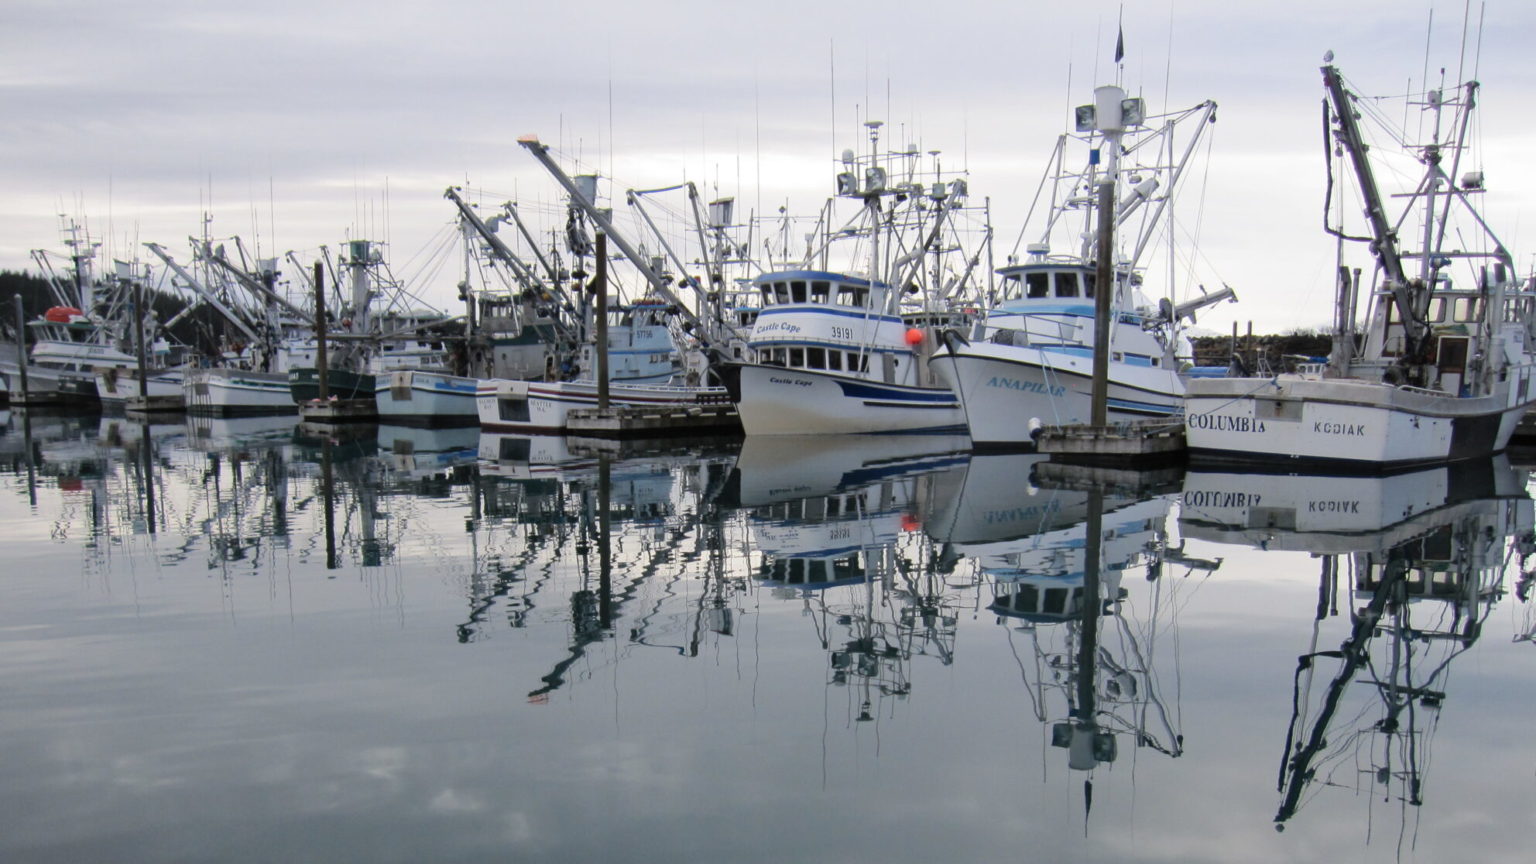 To encourage more young fishermen, look to farm programs as models, new study argues